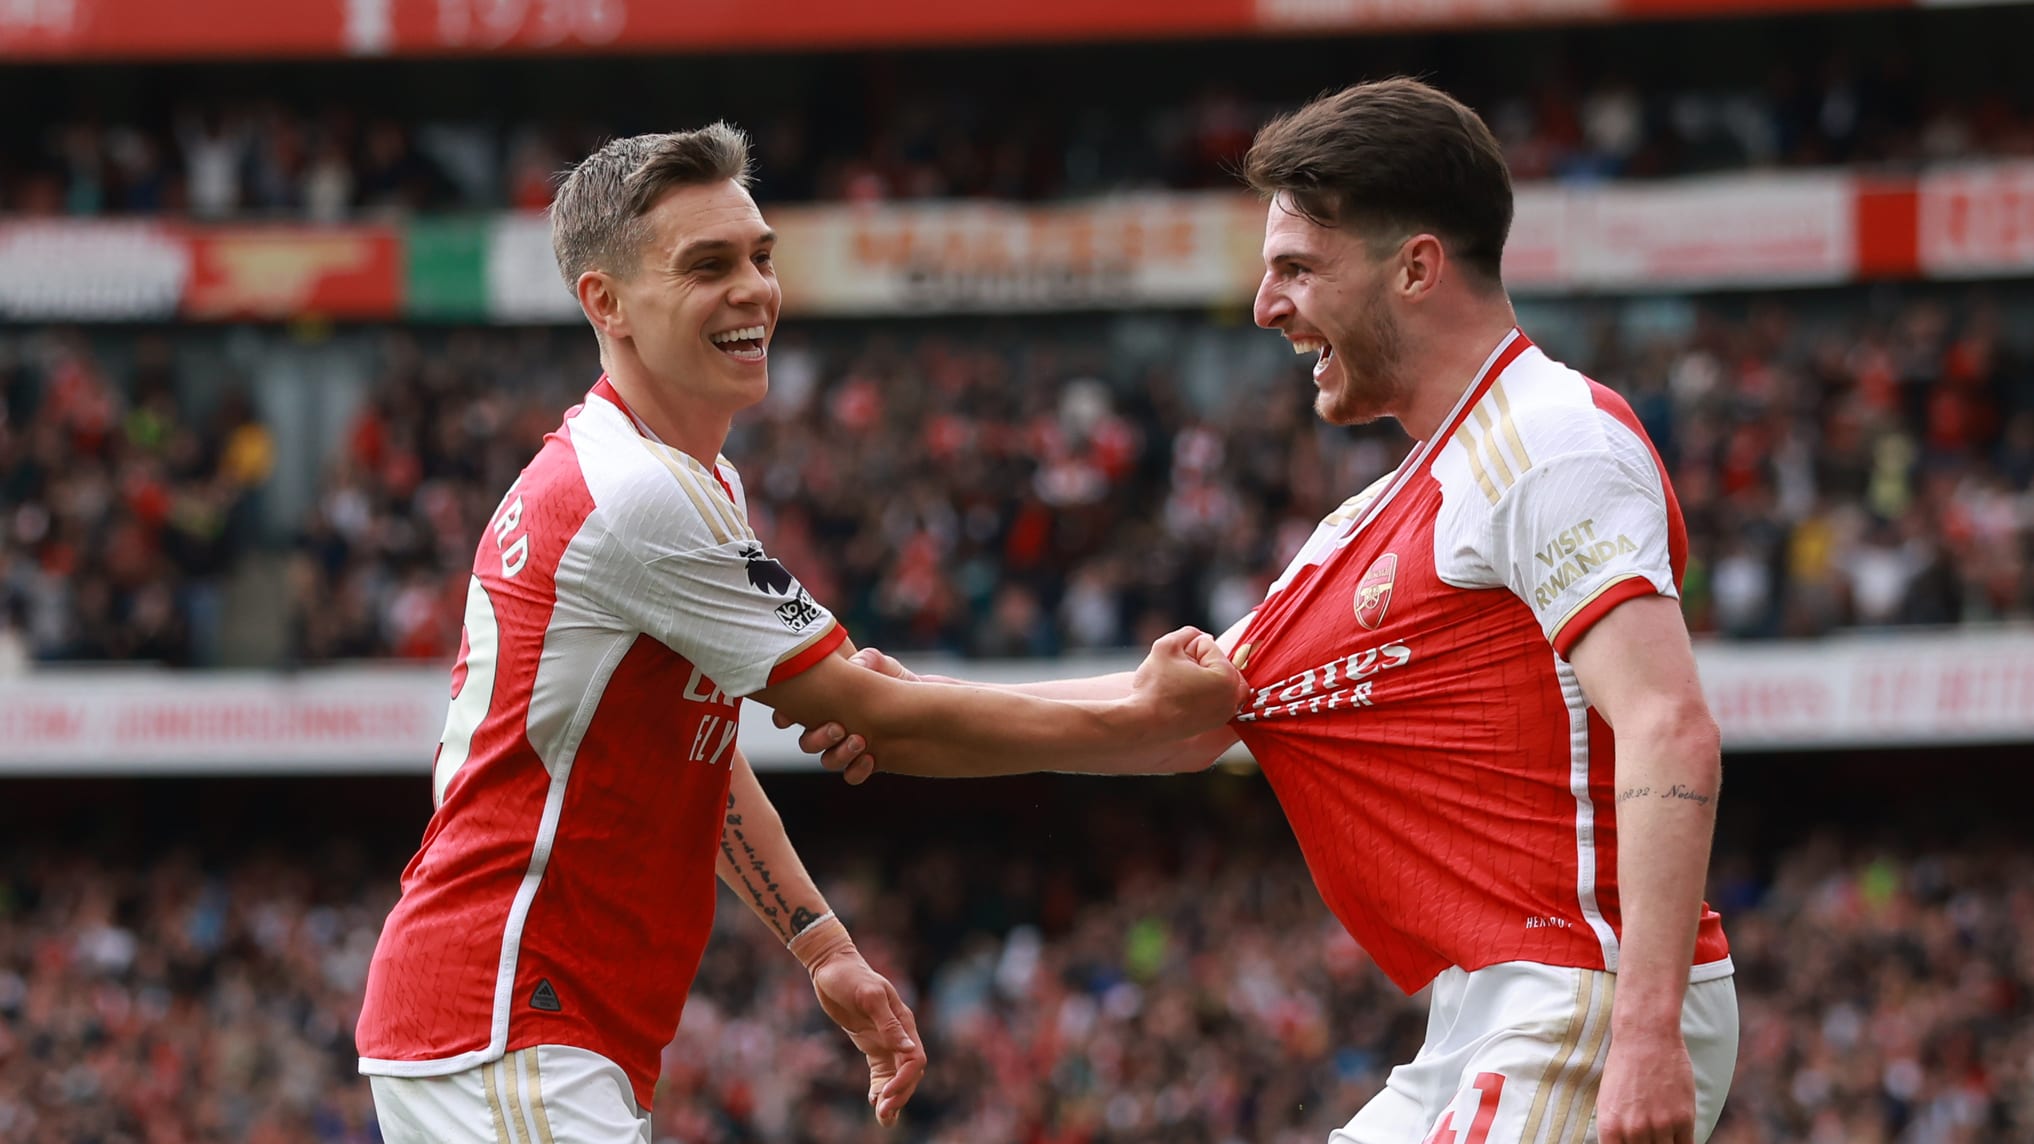 Arsenal’s Declan Rice Stars as Bournemouth Defeat Adds Points in PL